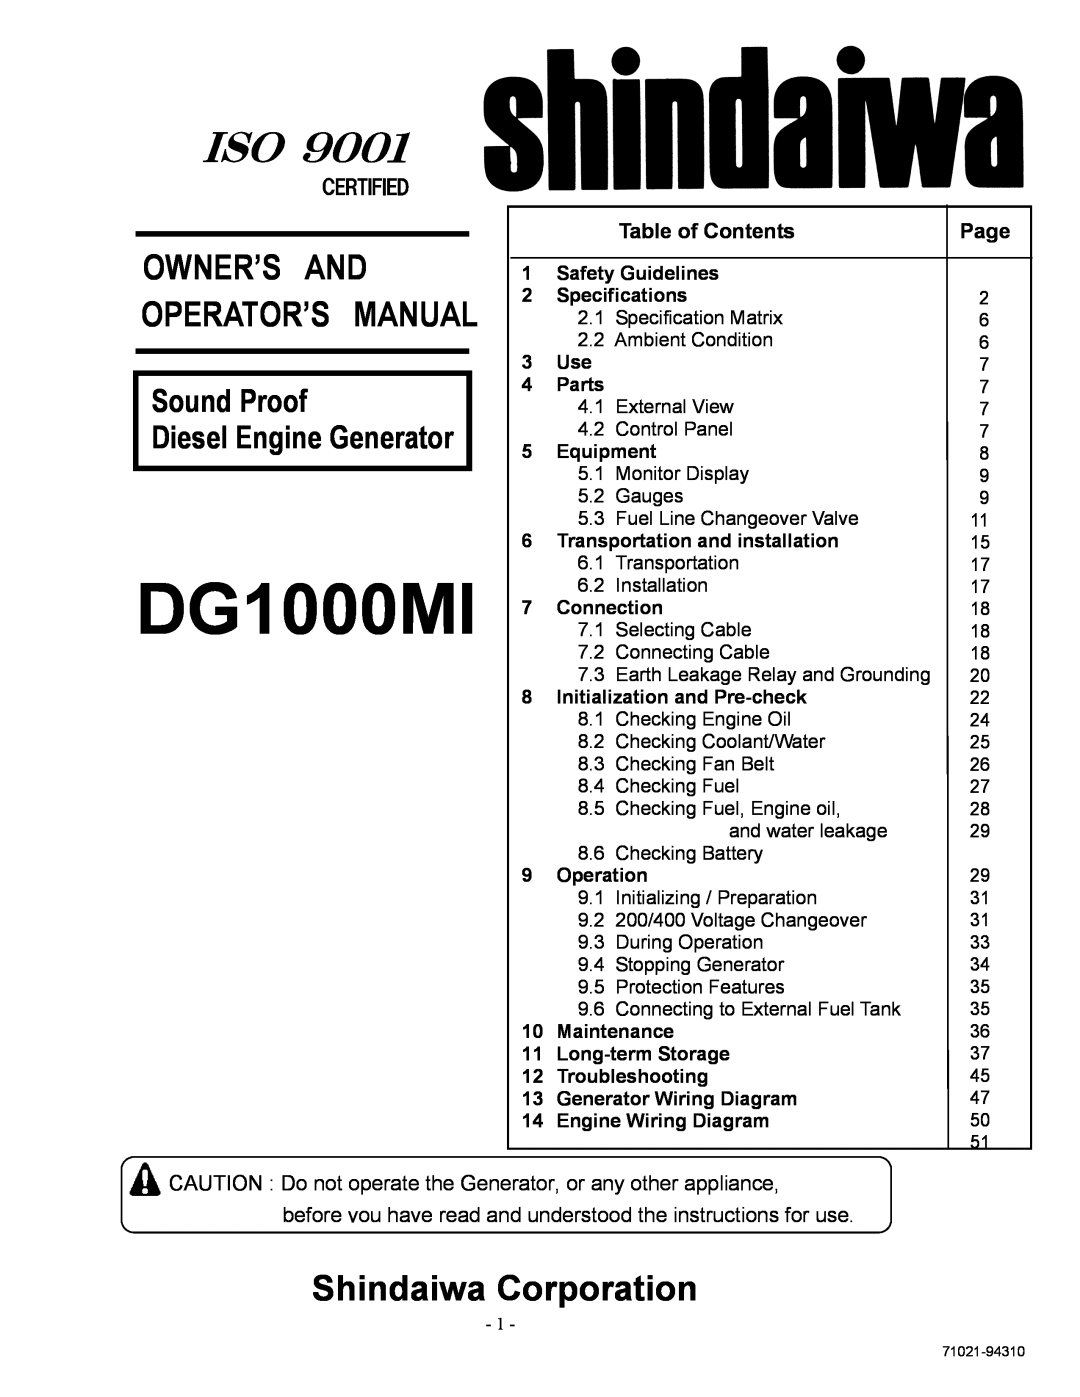 Shindaiwa DG1000MI manual Table of Contents, Page, Shindaiwa Corporation, Sound Proof, Owner’S And Operator’S Manual 